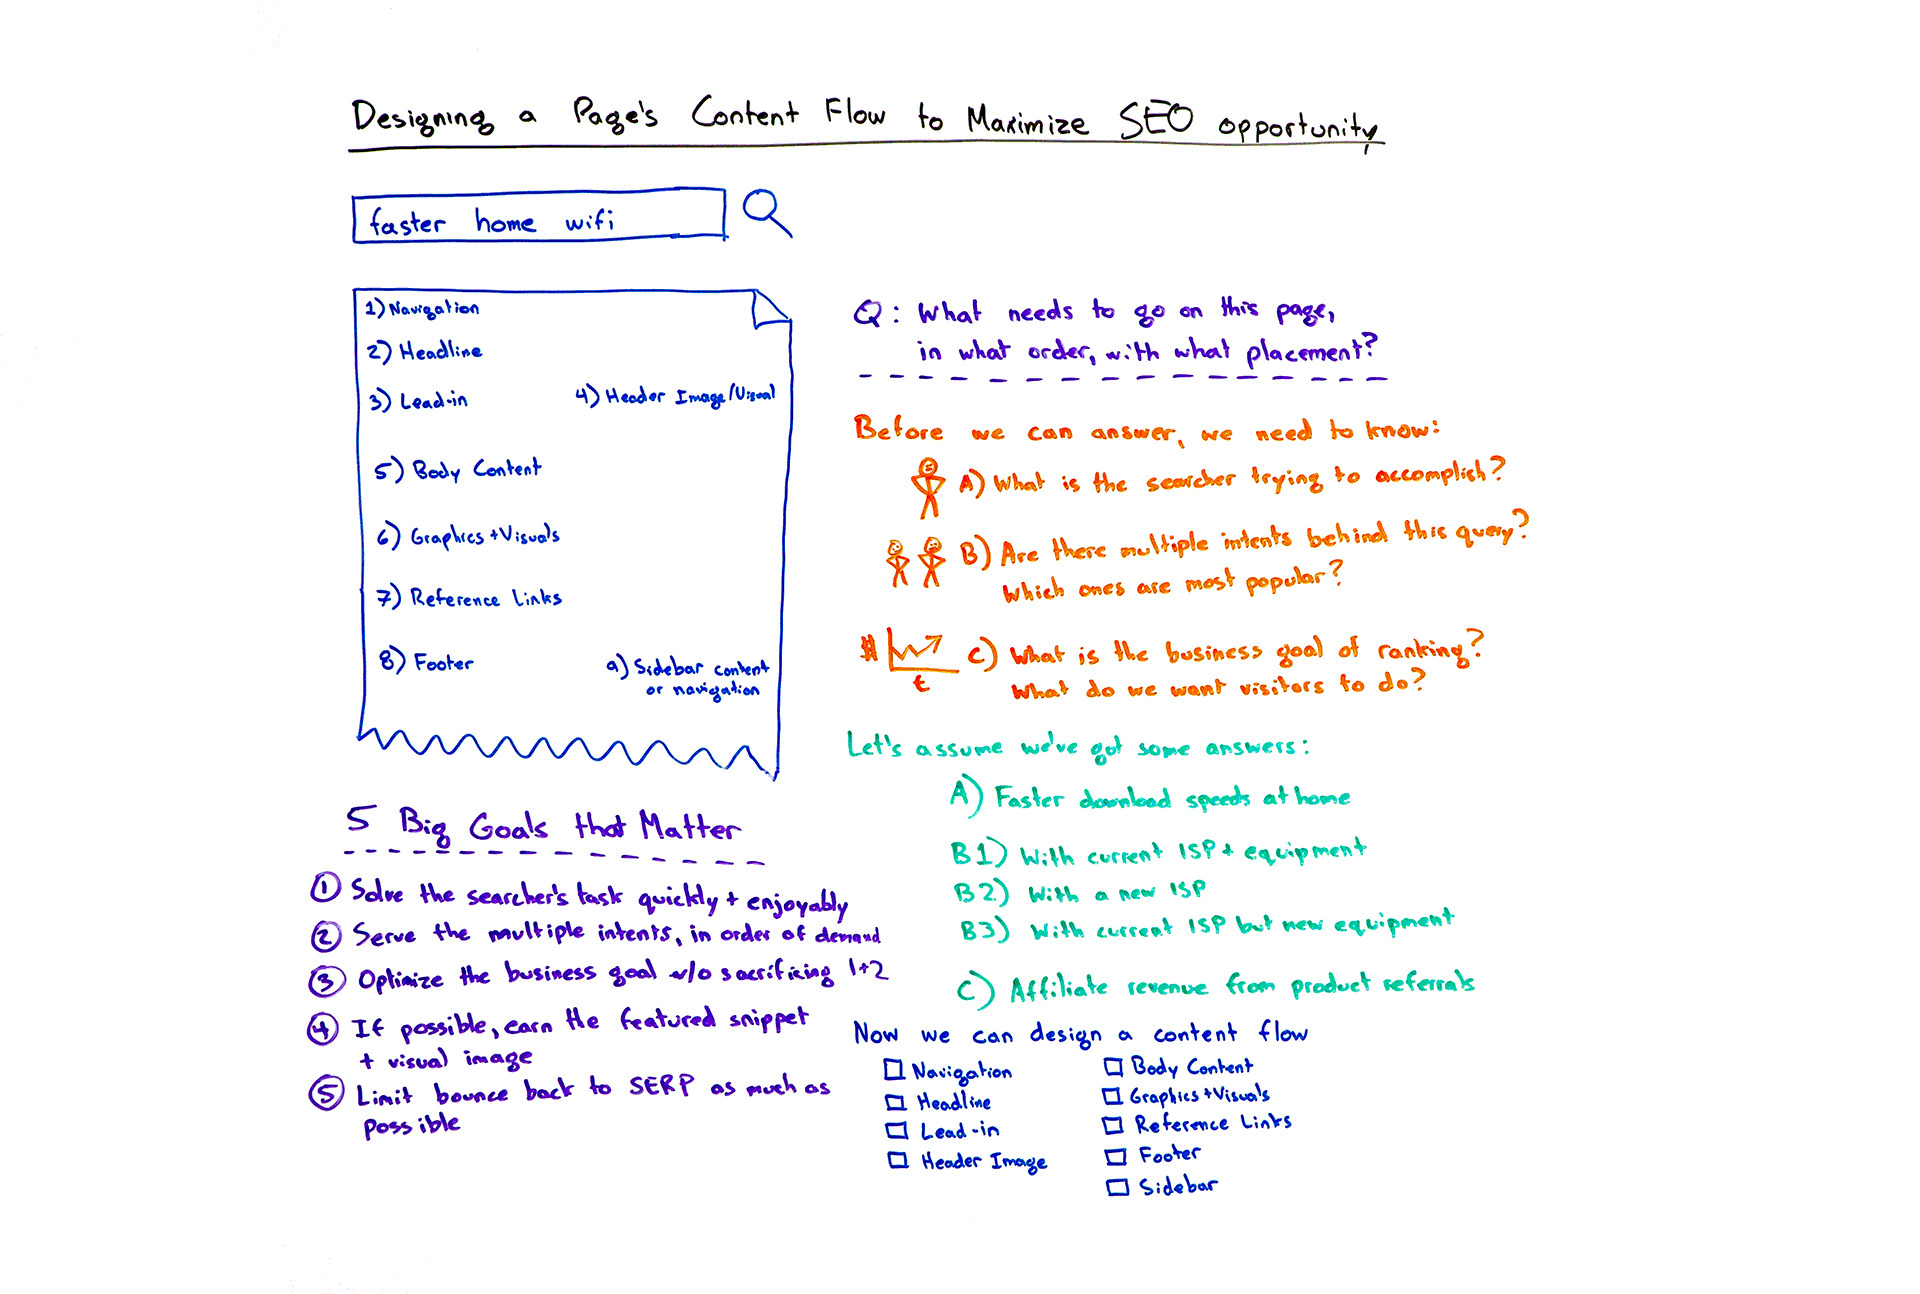 Designing a page's content flow to maximize SEO opportunity